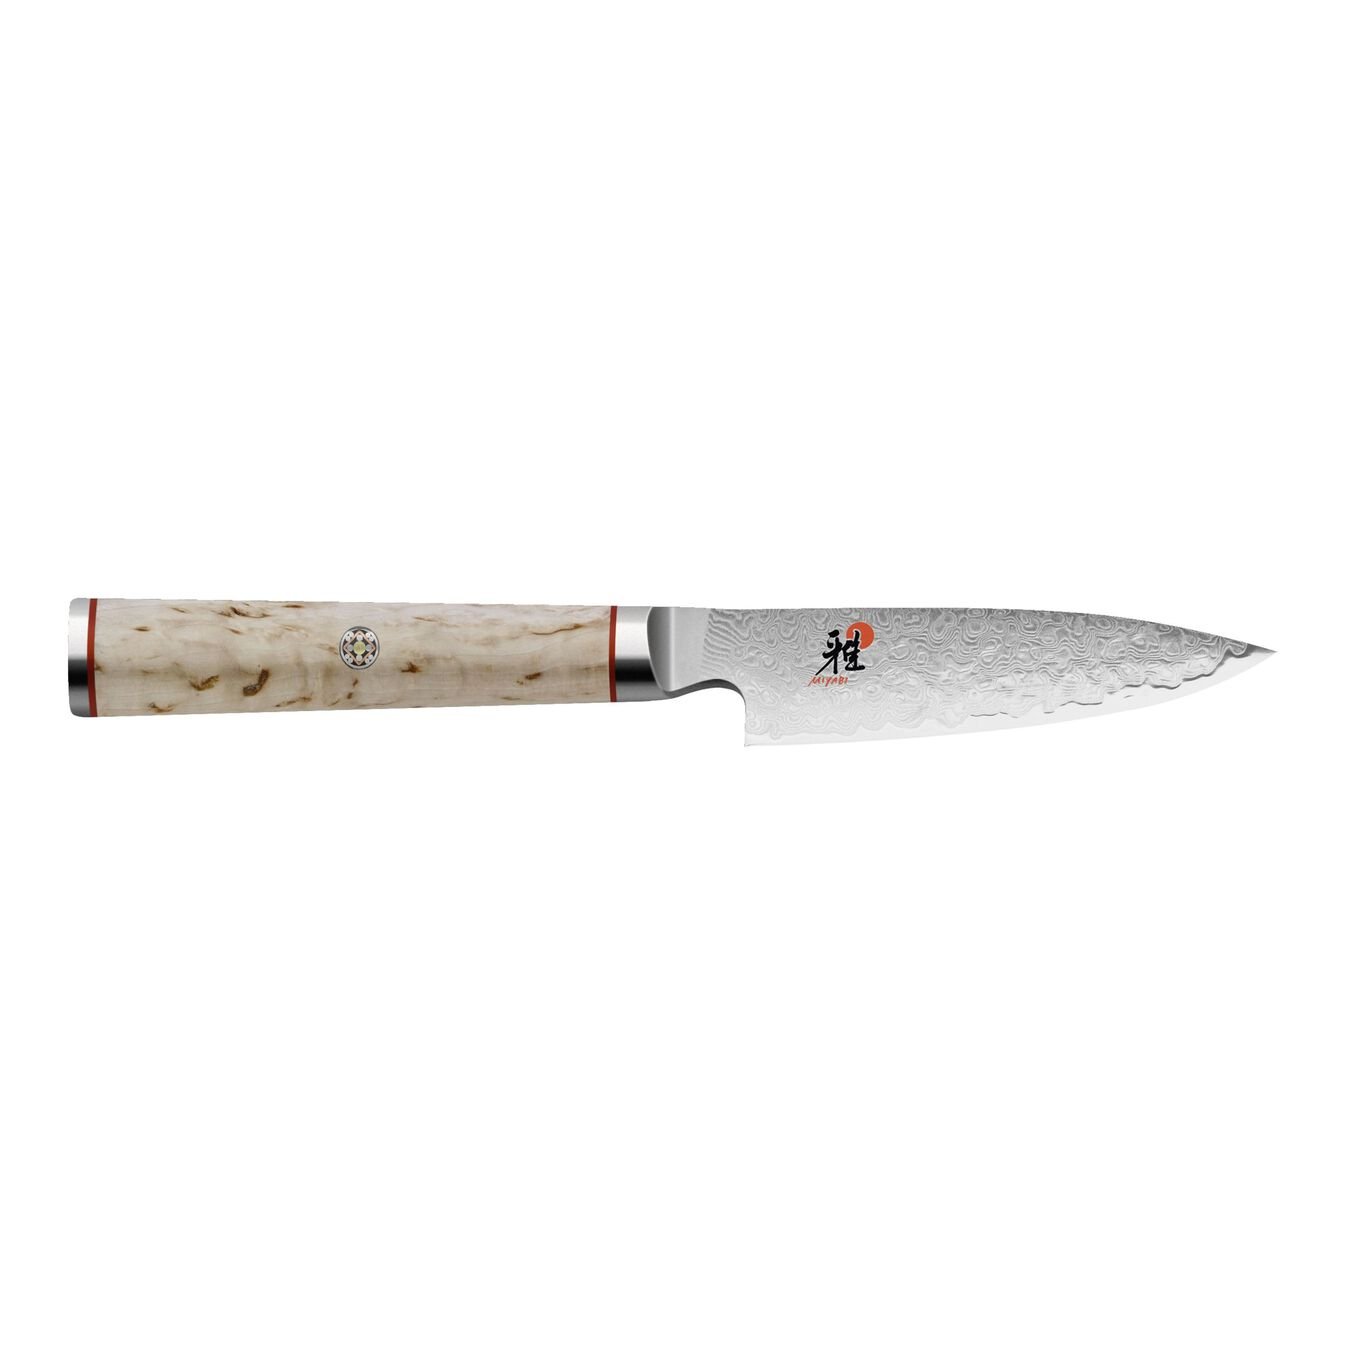 3.5-inch birch Paring Knife,,large 1